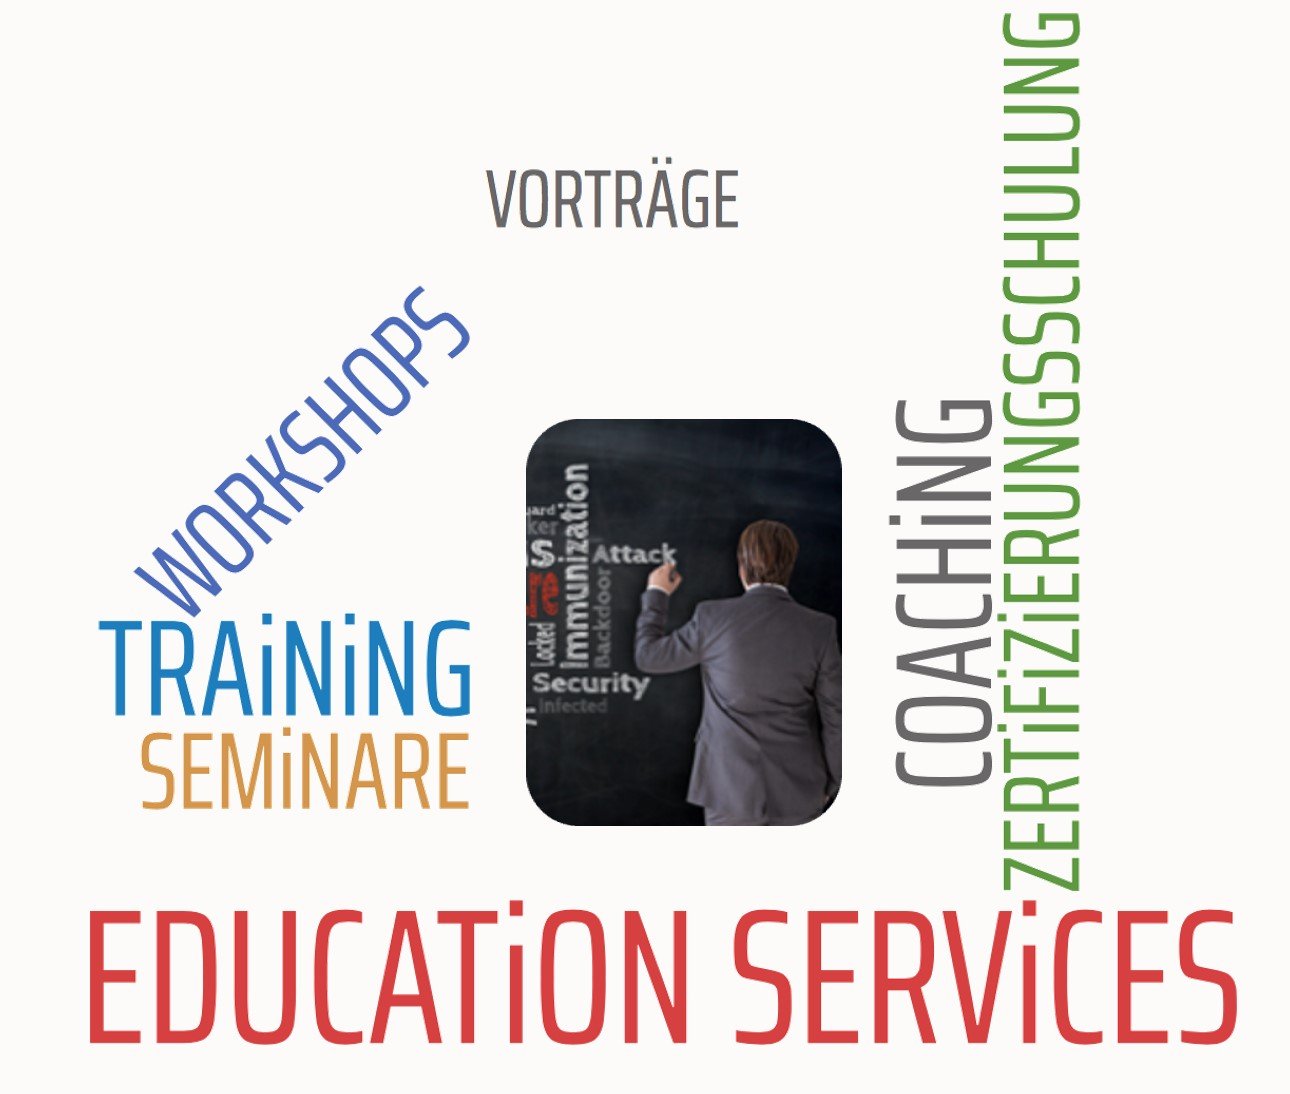 WordCloud_EducationServices